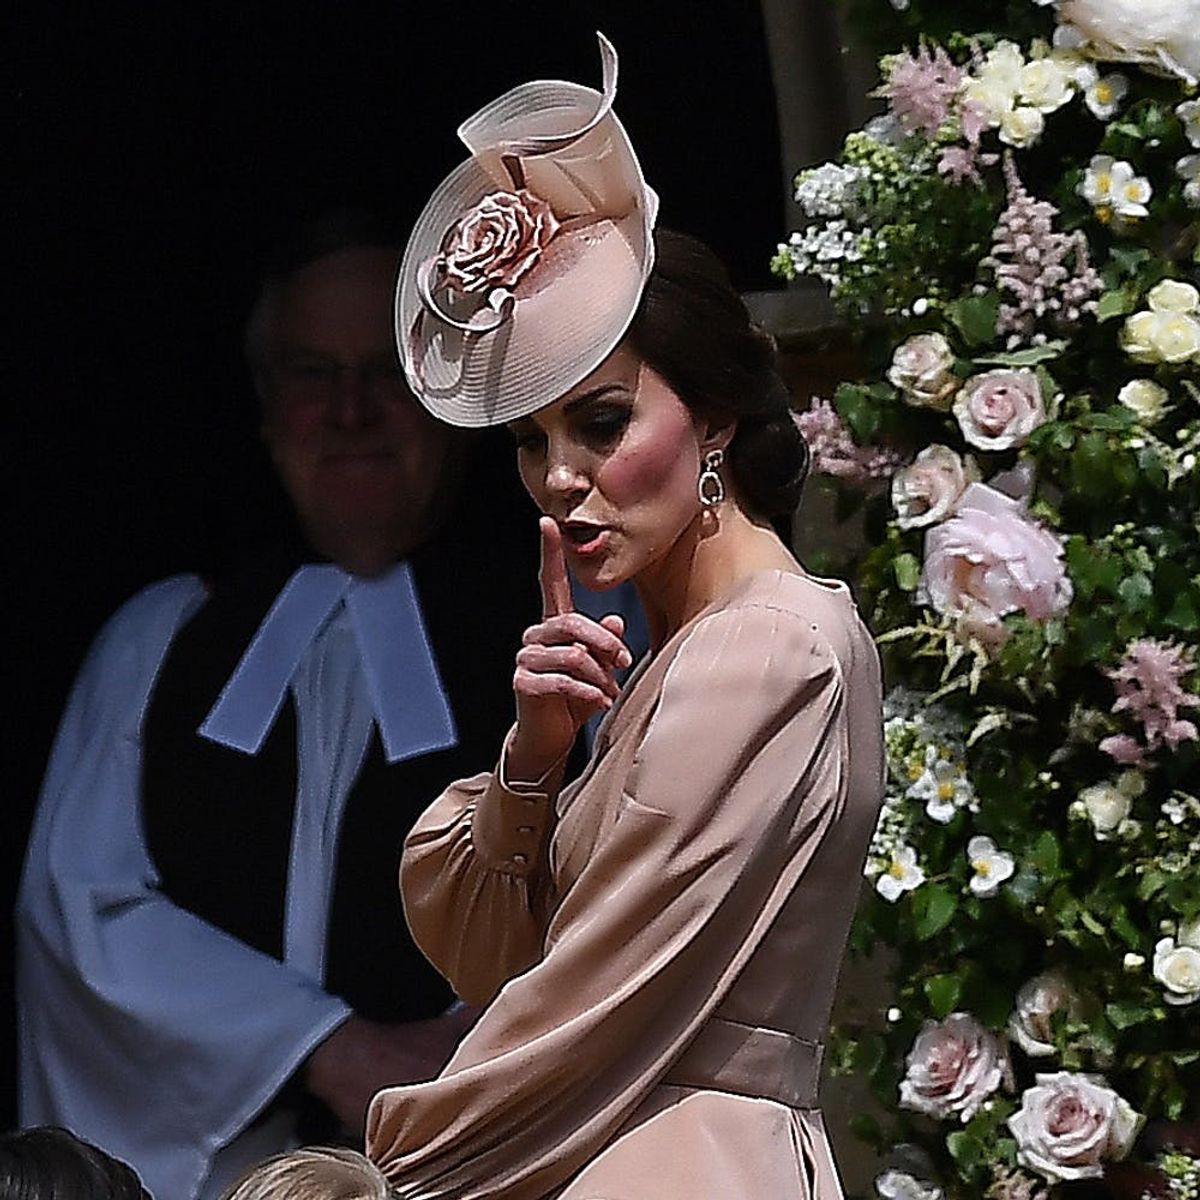 These Photos of Kate Middleton Scolding the Kids at Pippa’s Wedding Are Going Viral